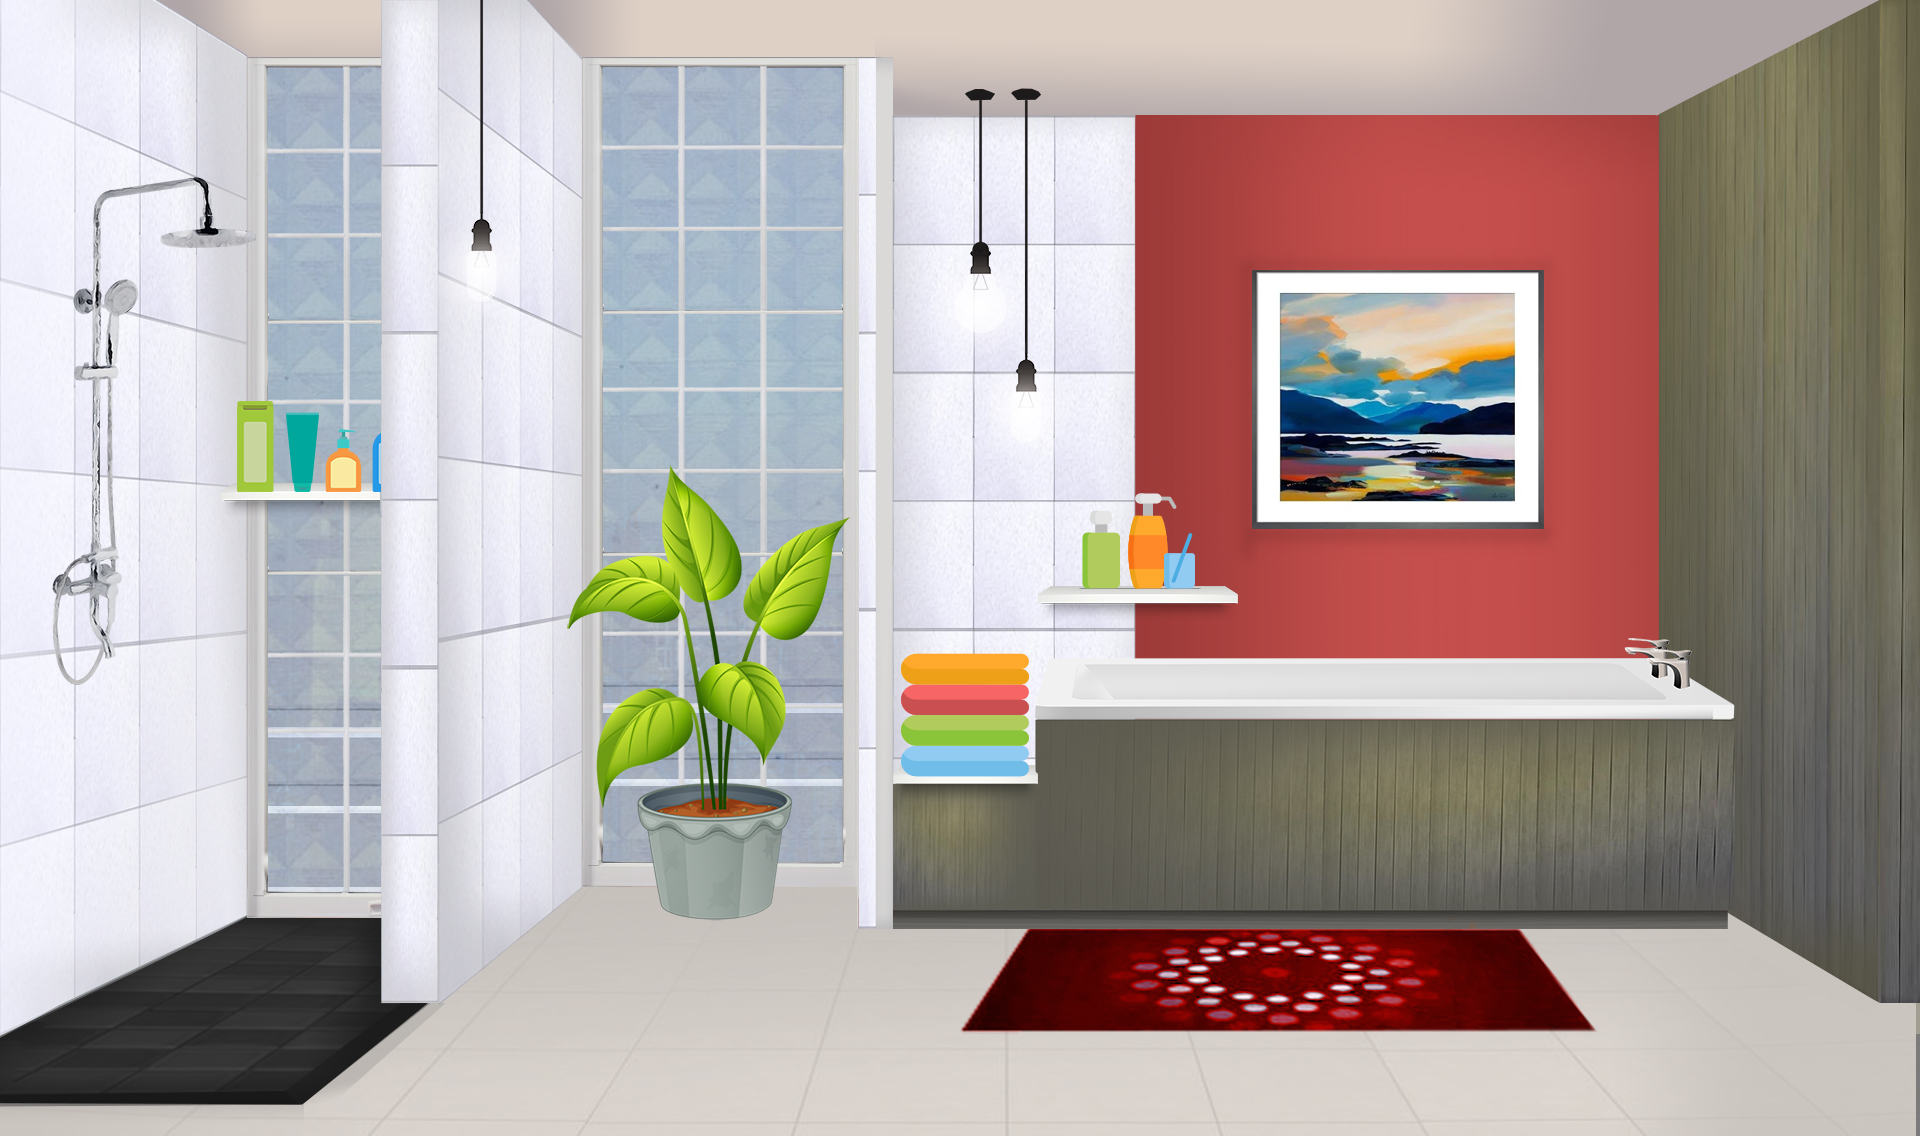 INT. RED BATHROOM DECORATED – NIGHT